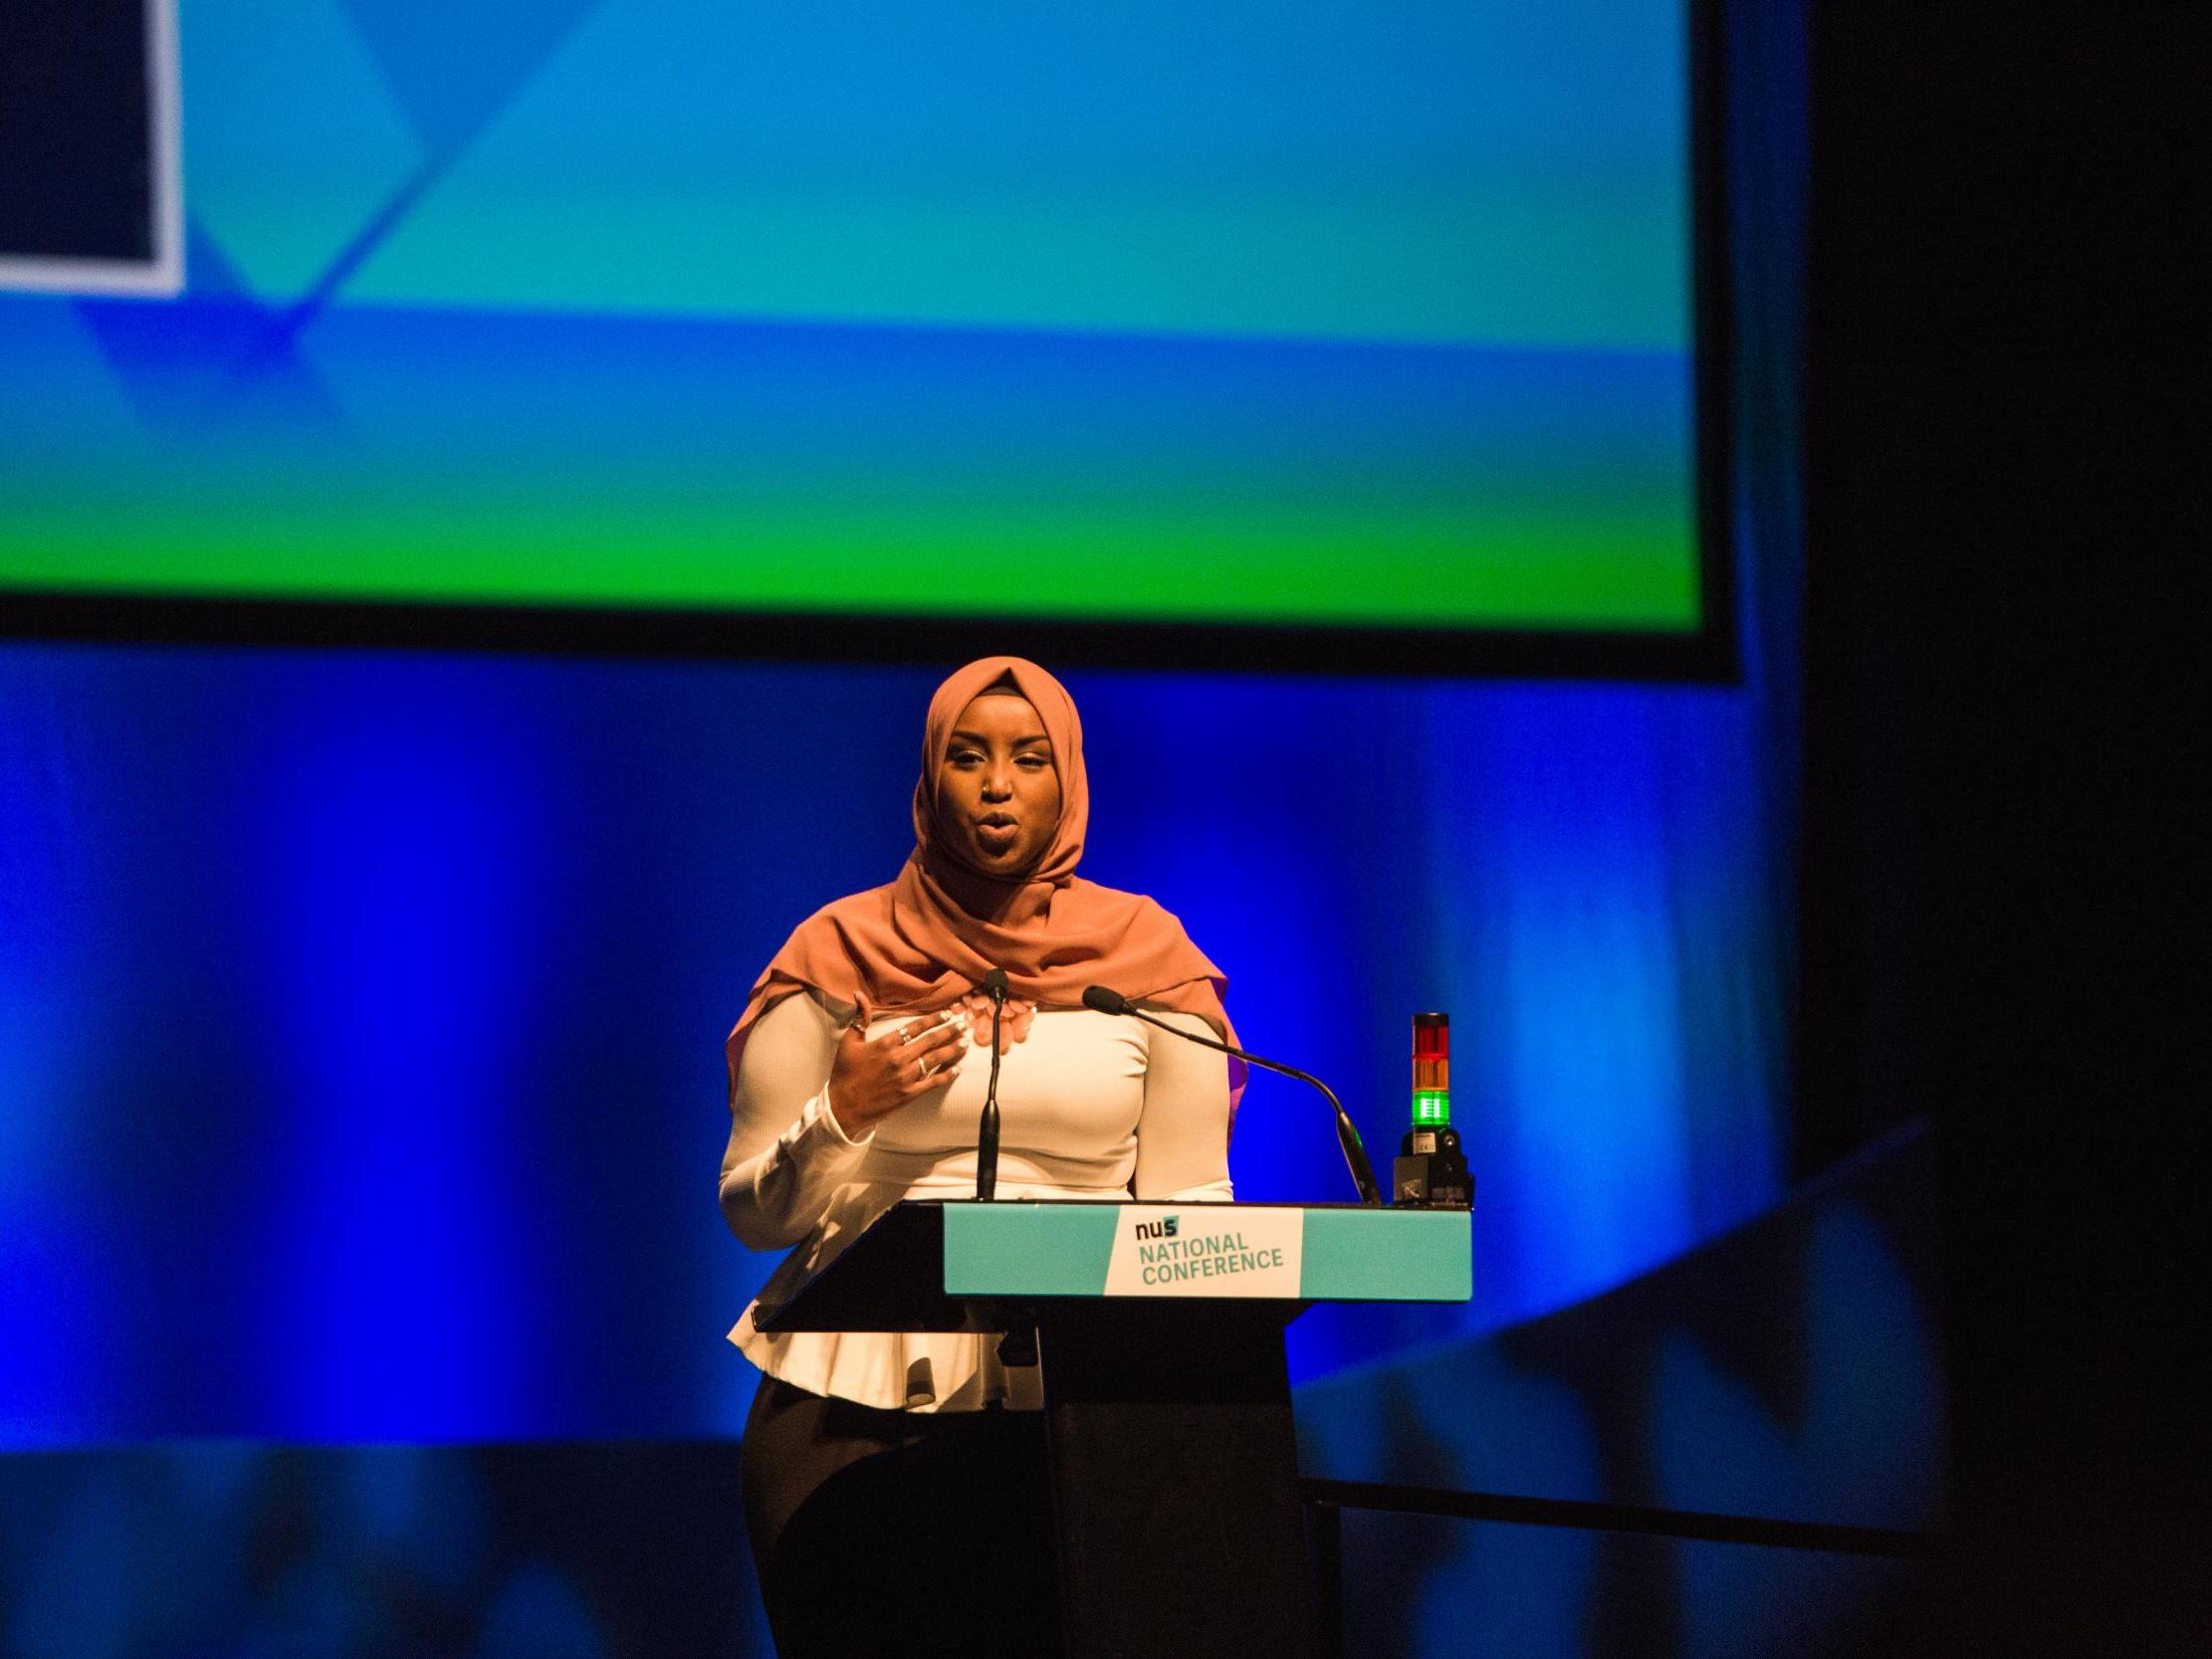 Zamzam Ibrahim: Newly elected NUS president vows to fight racism and rising student fees